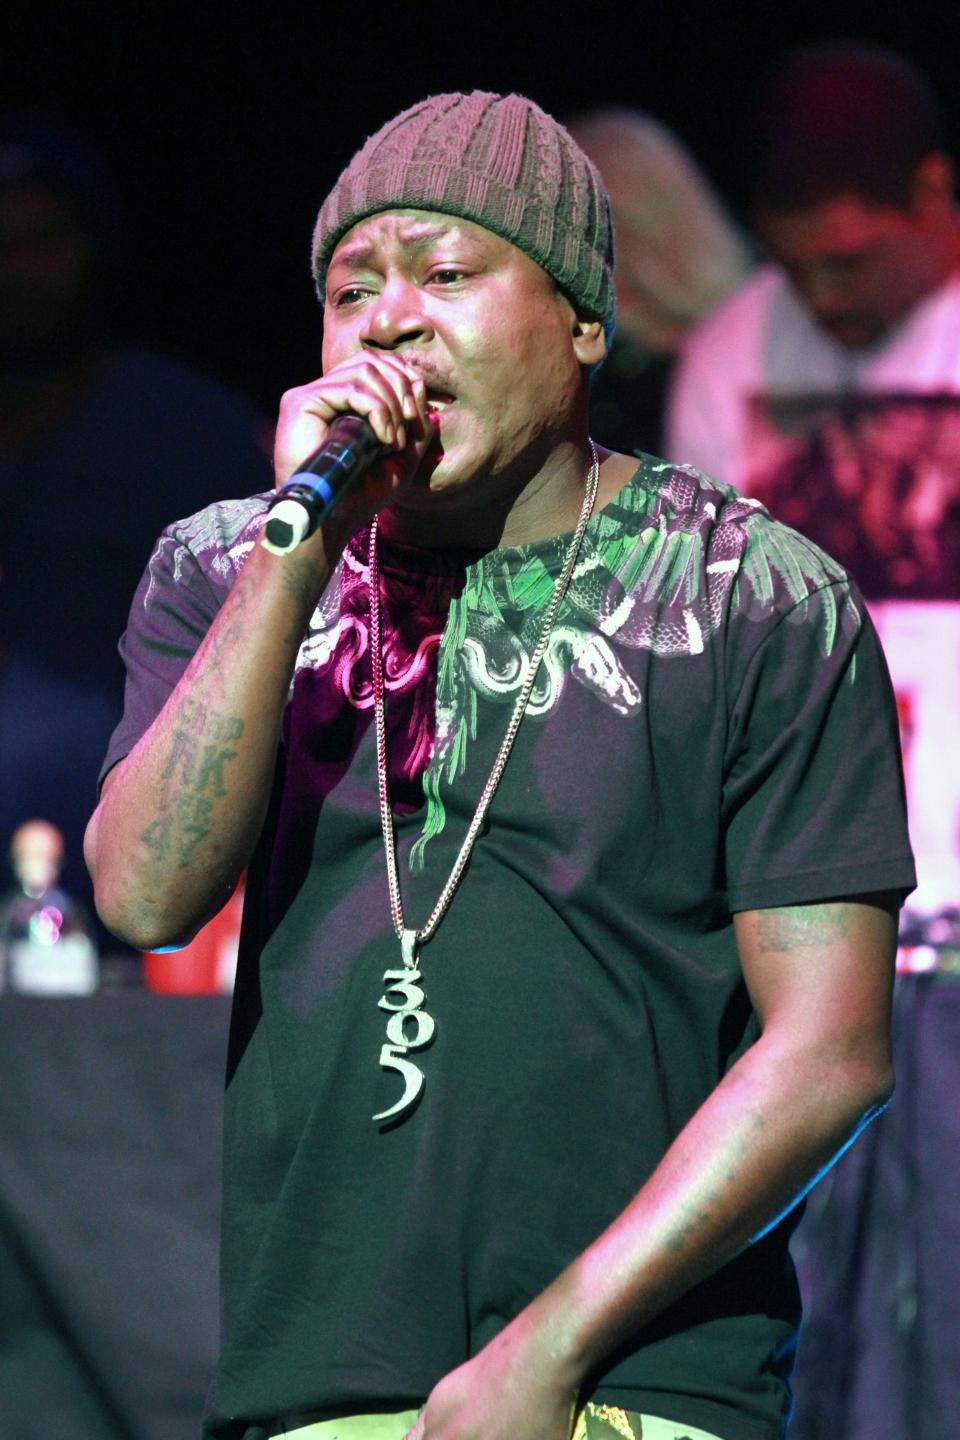 Trick Daddy will play a 25th anniversary show featuring CeeLo Green, Trina and others at Tampa's Yuengling Center on Aug. 27.